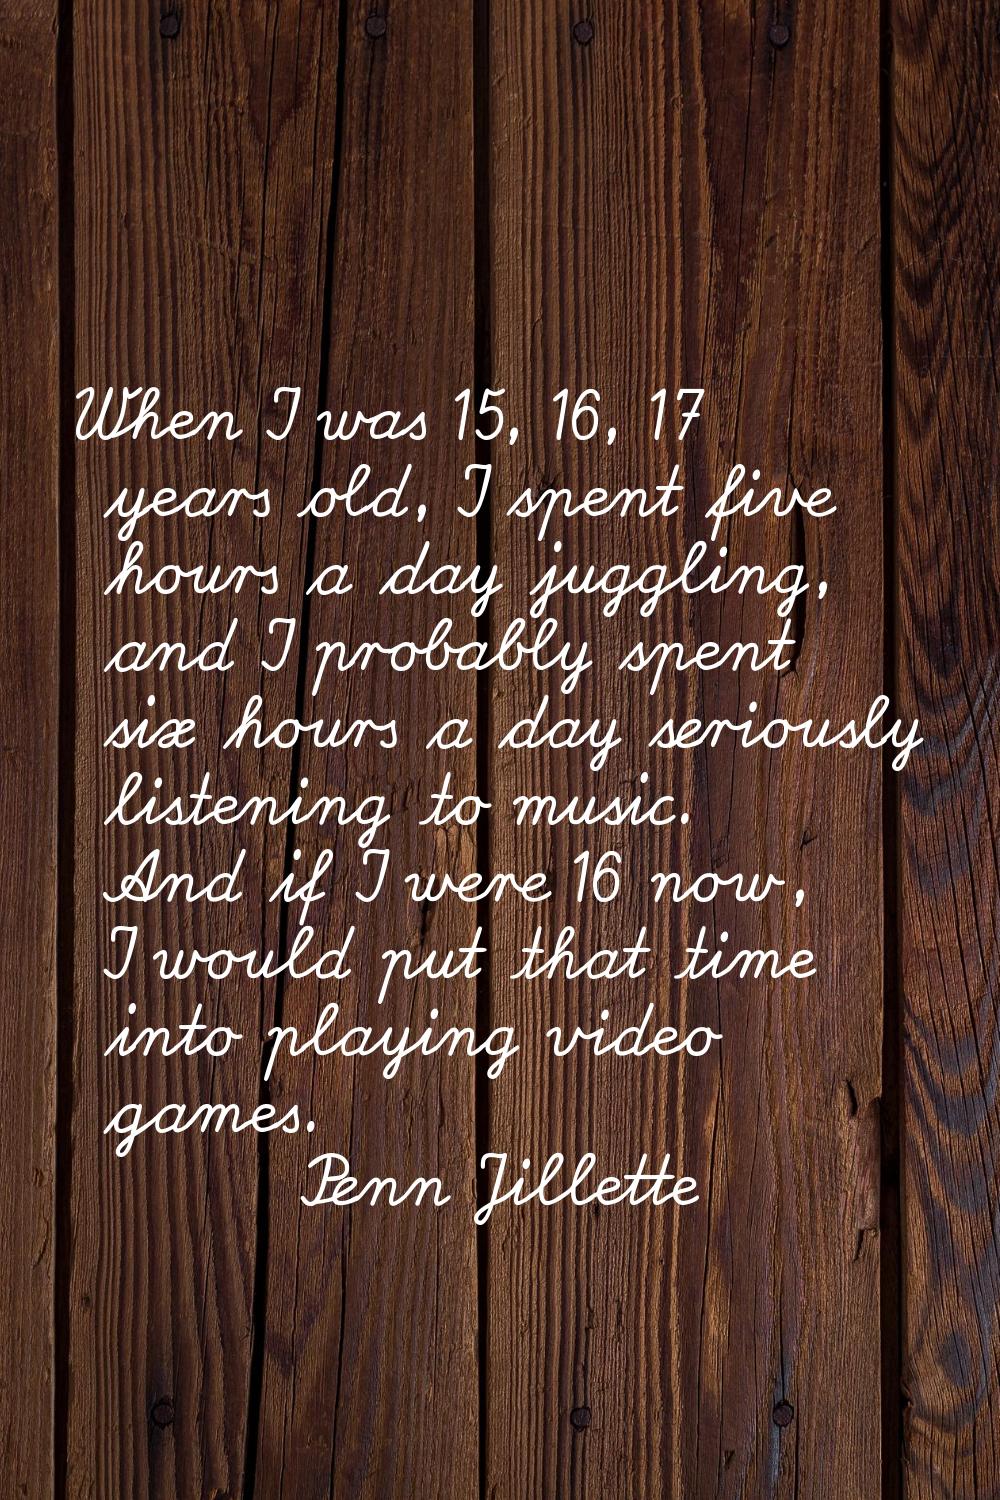 When I was 15, 16, 17 years old, I spent five hours a day juggling, and I probably spent six hours 